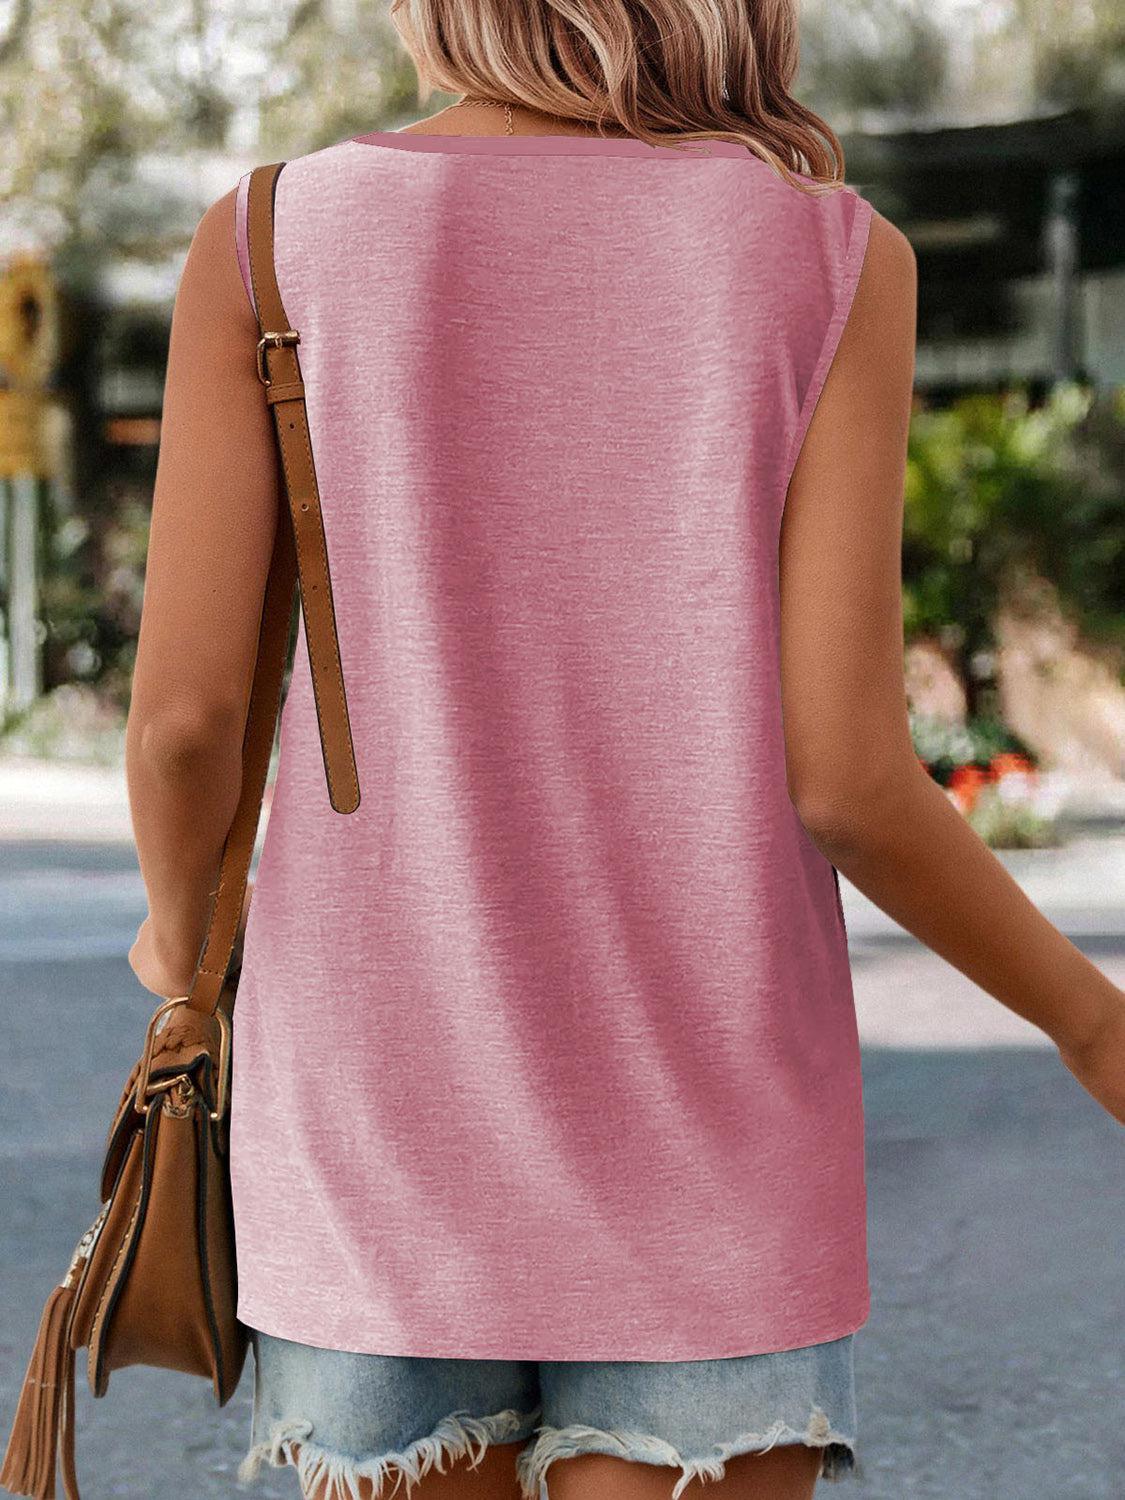 a woman walking down the street wearing a pink top